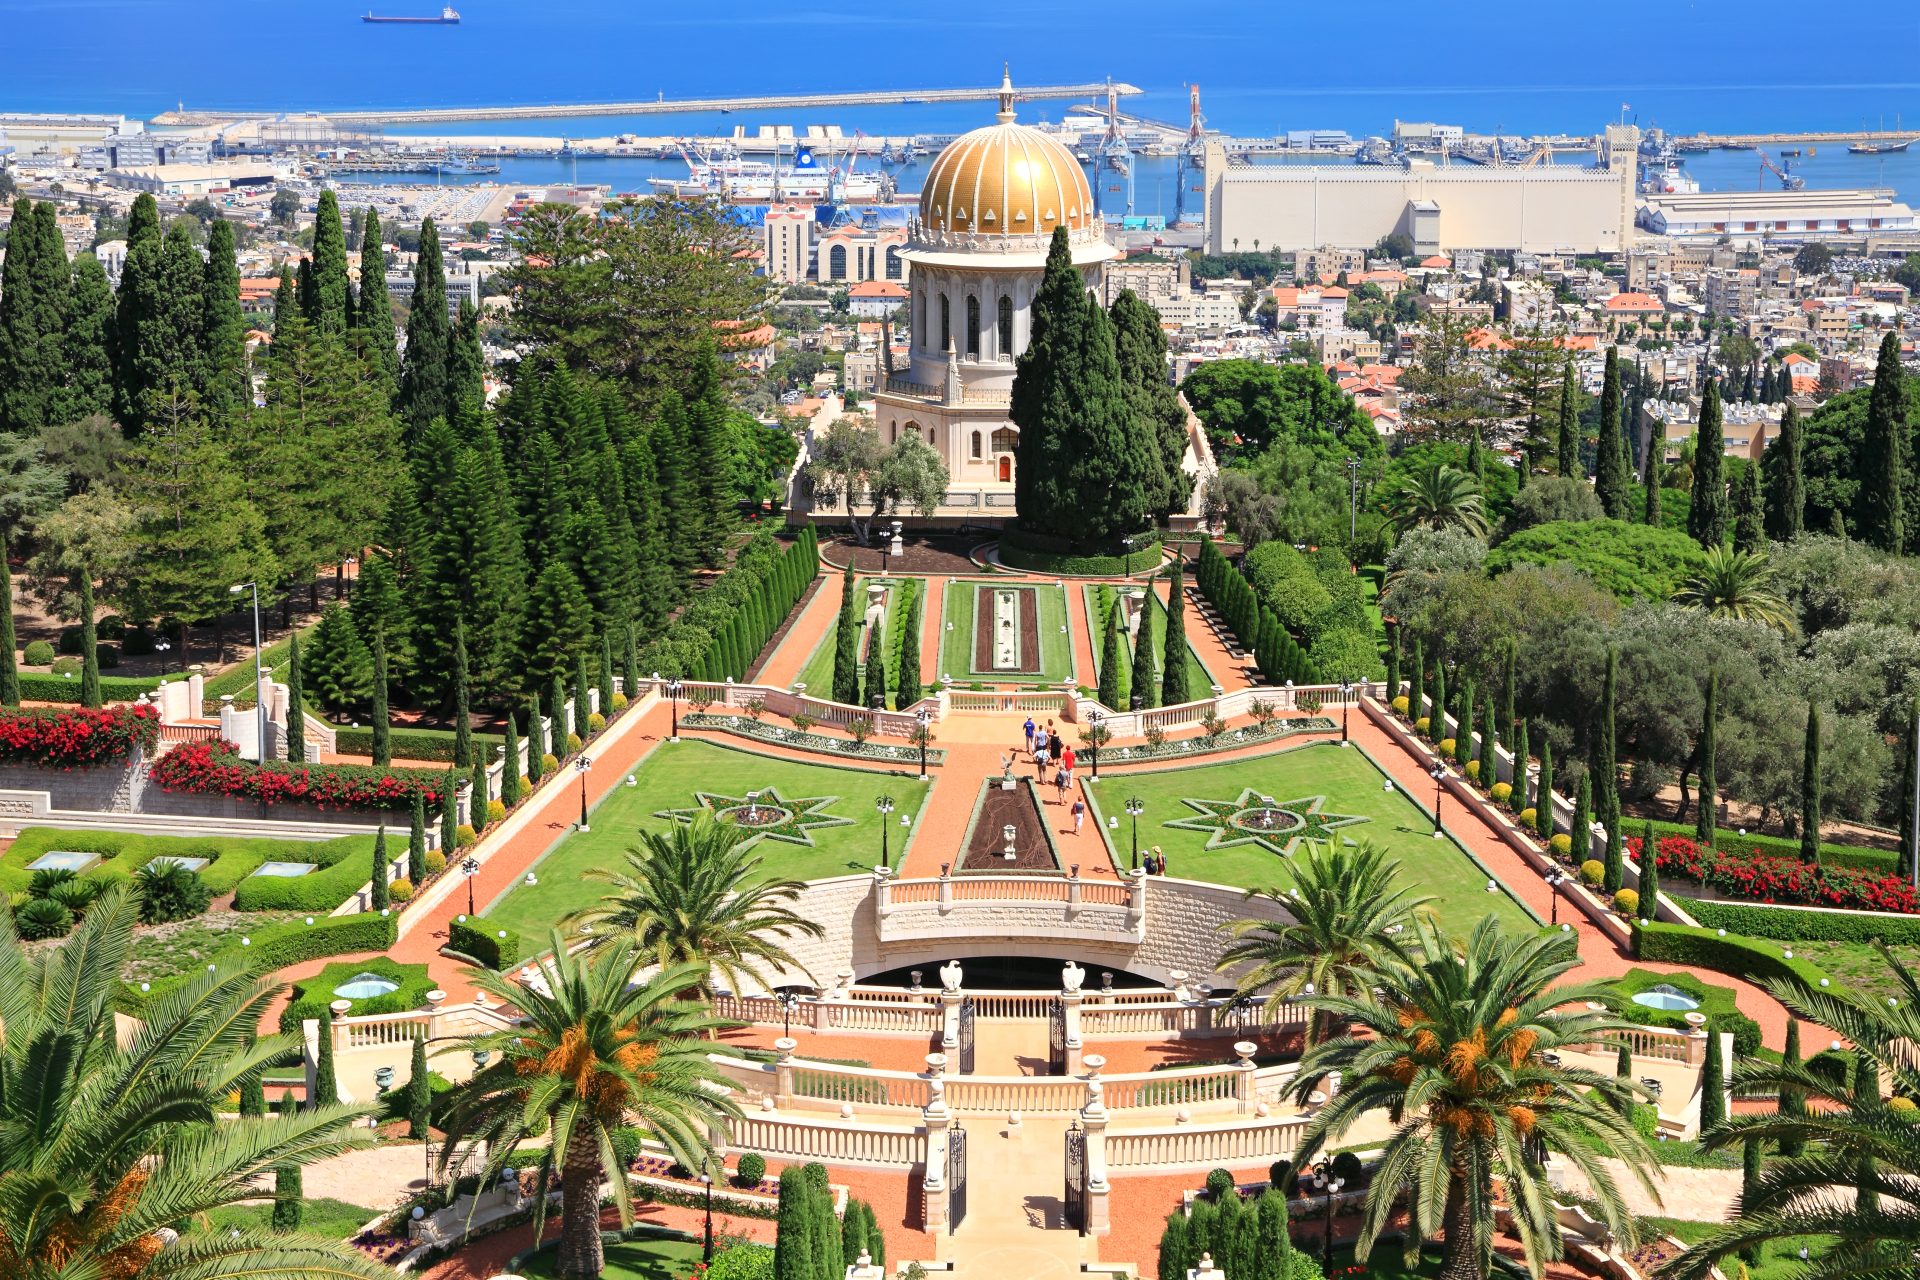 Bahai gardens and temple on the slopes of the Carmel Mountain and view of the Mediterranean Sea and bay of Haifa city Israel